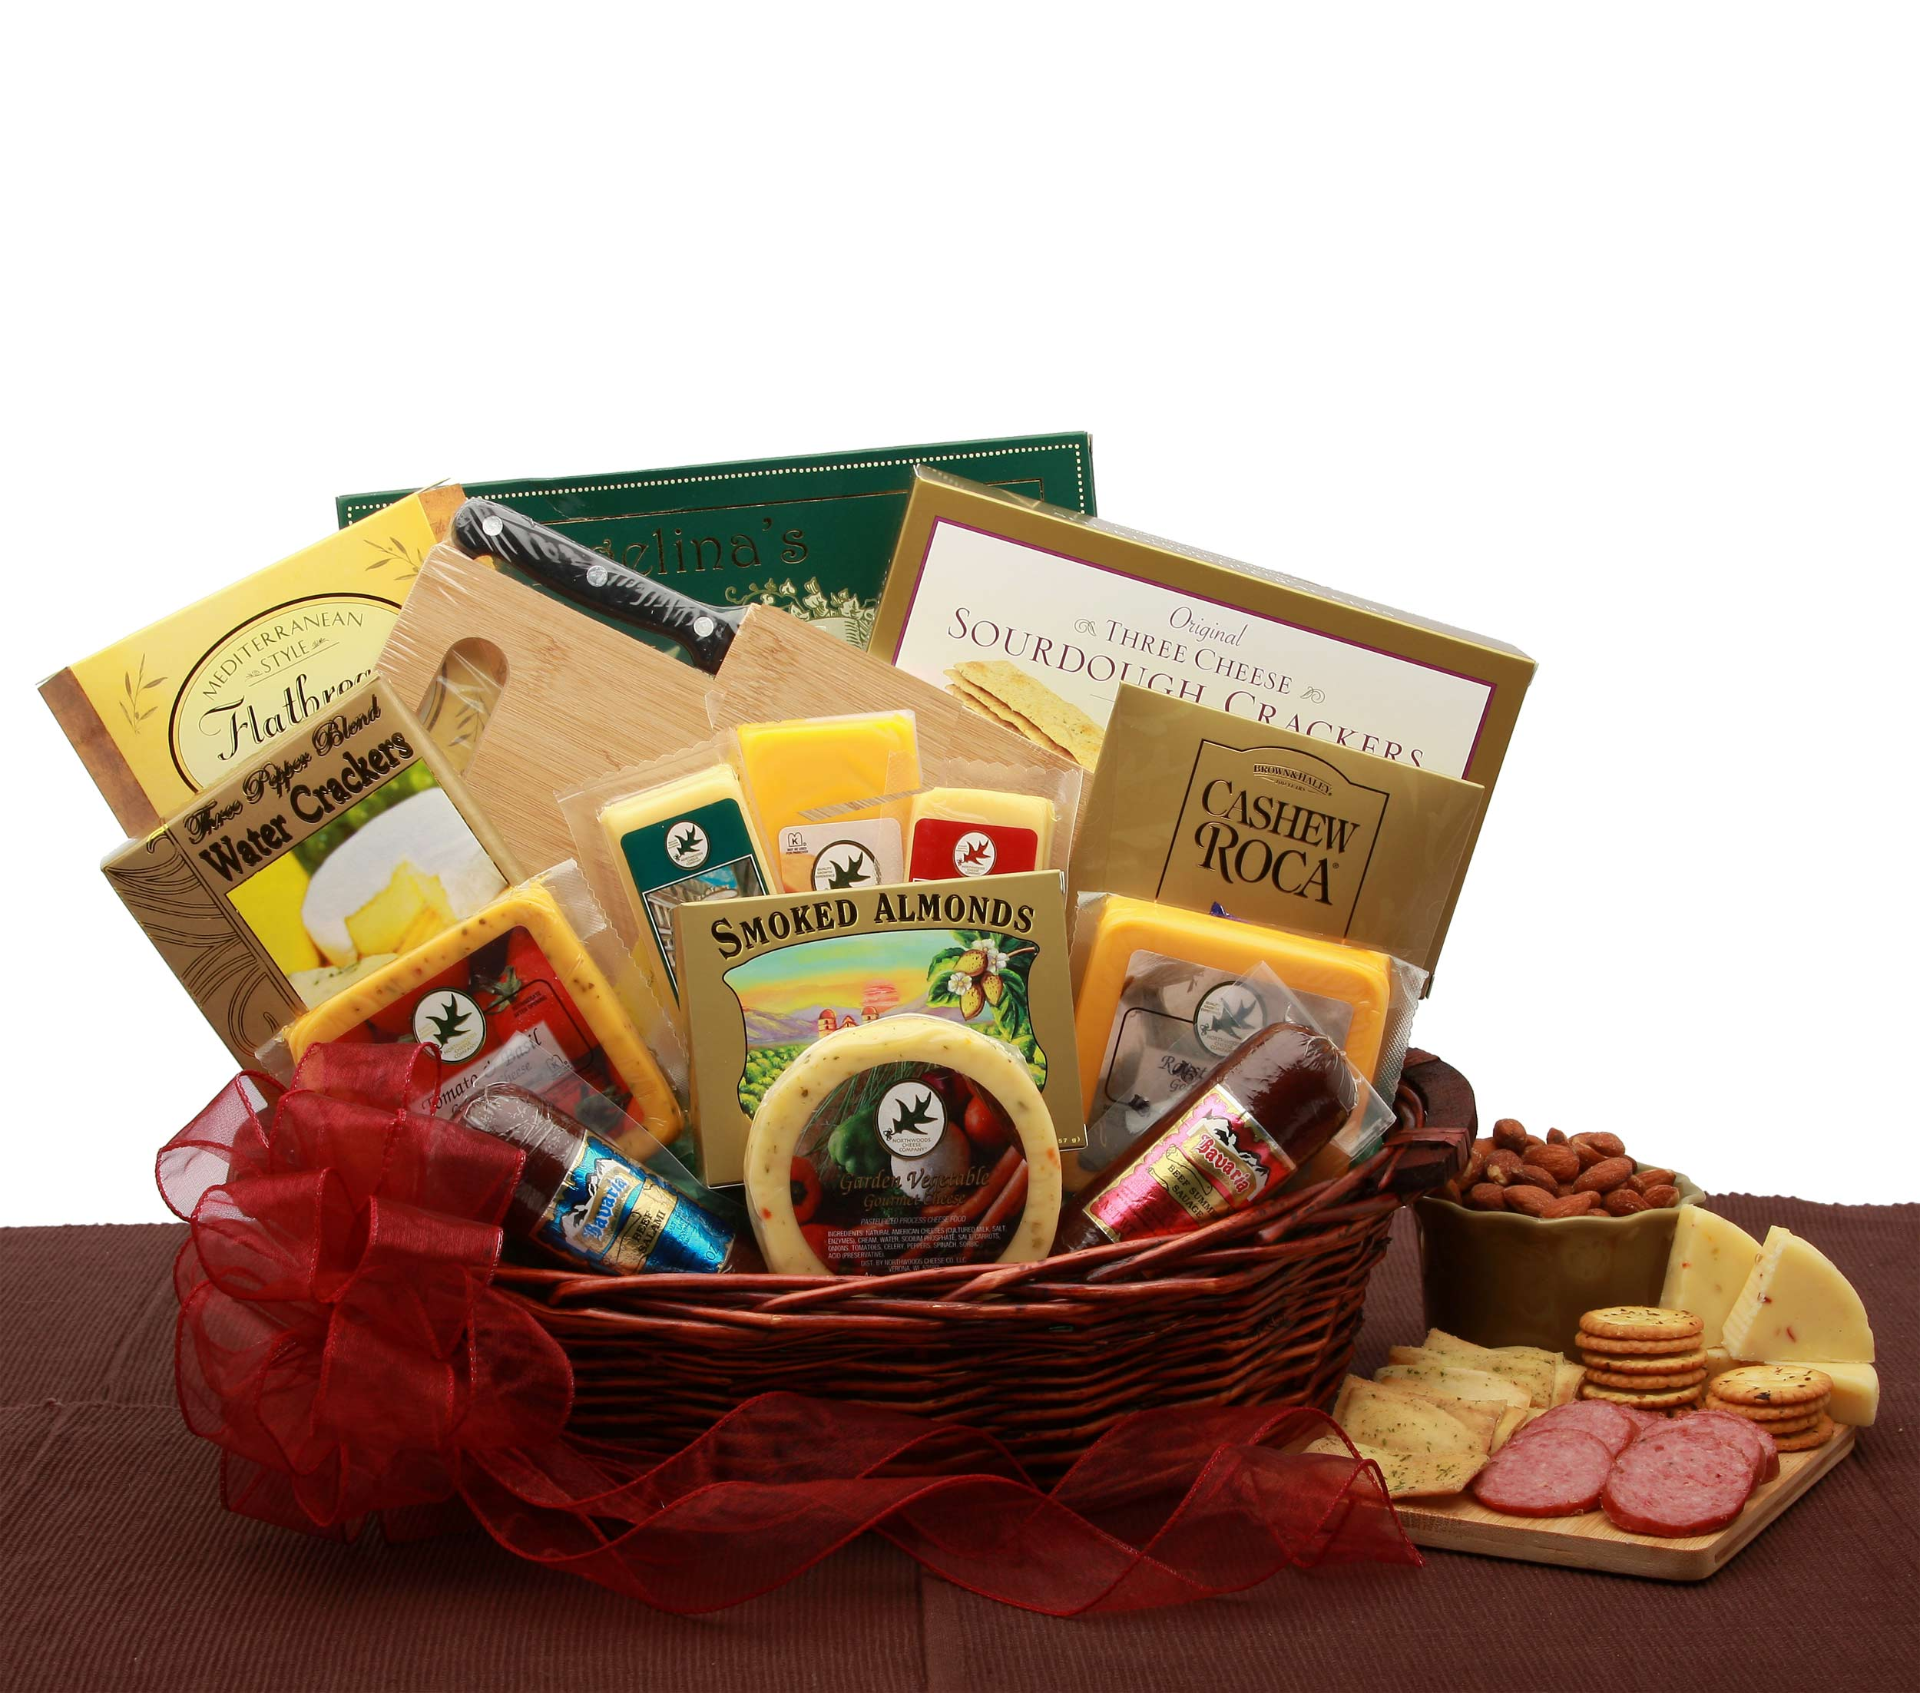 Gourmet food basket with cheese, crackers, almonds, and salami.